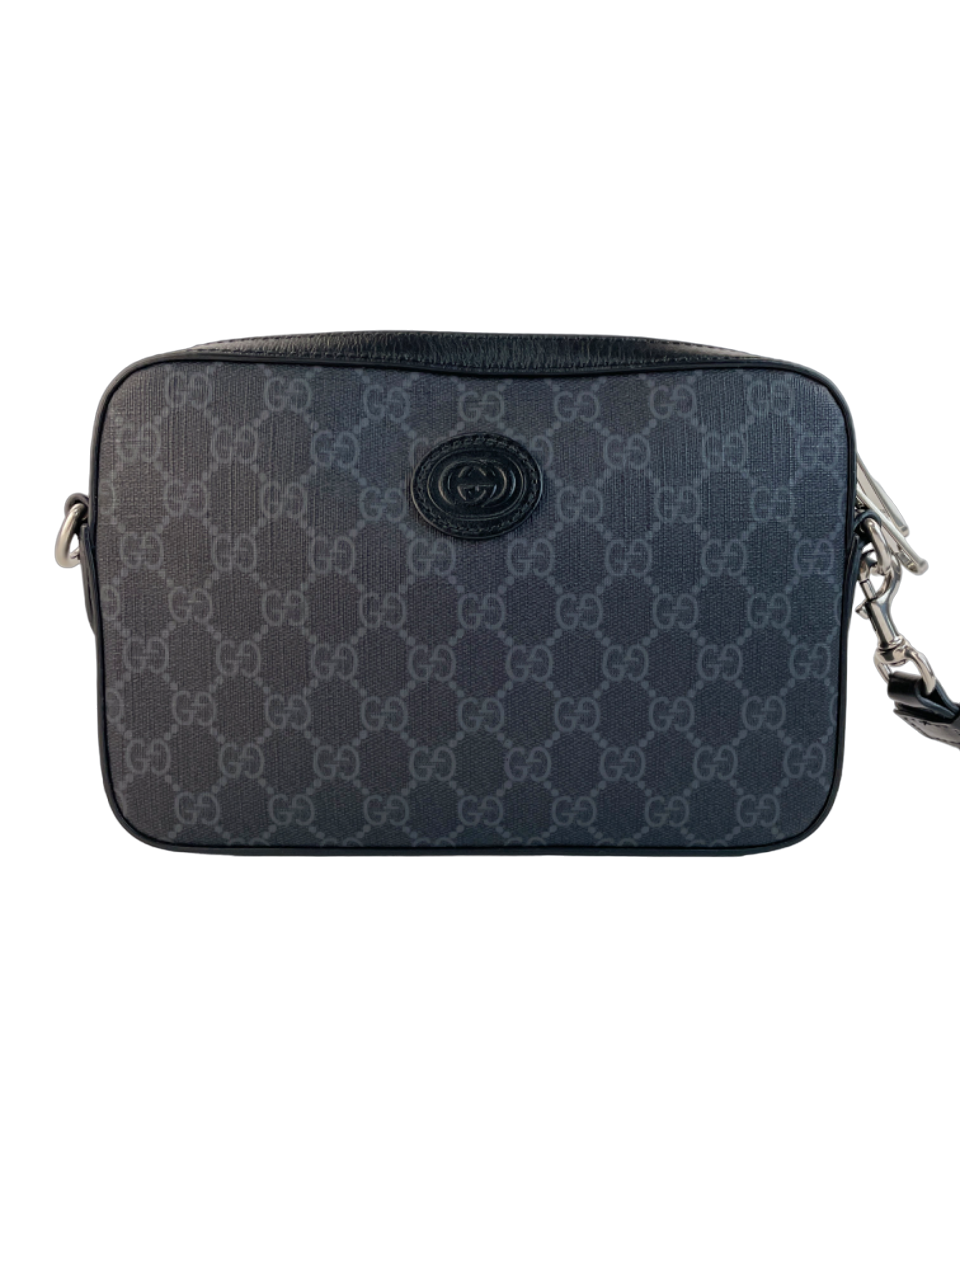 082923 SNEAK SNEEK PRELOVED Gucci GG Coated Canvas Messenger Bag with –  KimmieBBags LLC